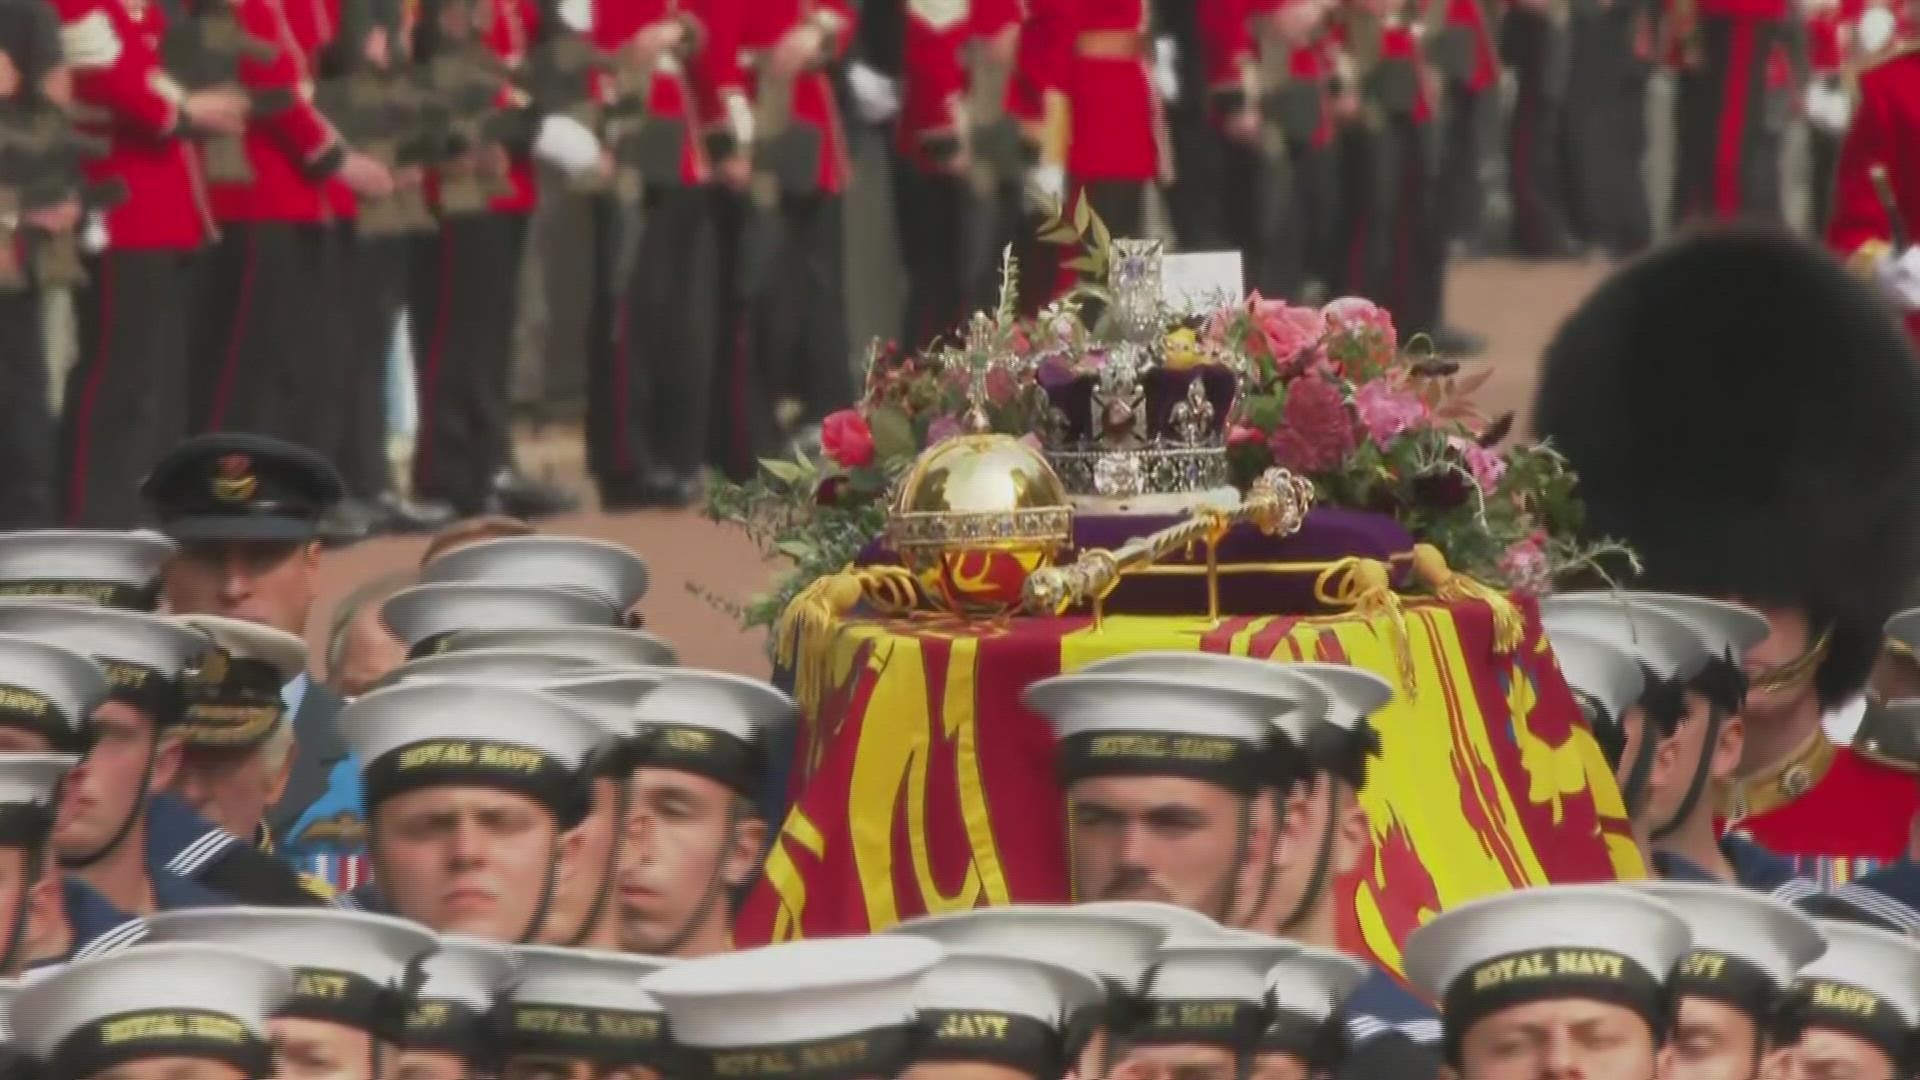 The note placed in the wreath on the queen's coffin was written by King Charles: "In loving and devoted memory. Charles R." (CNN Newsource)